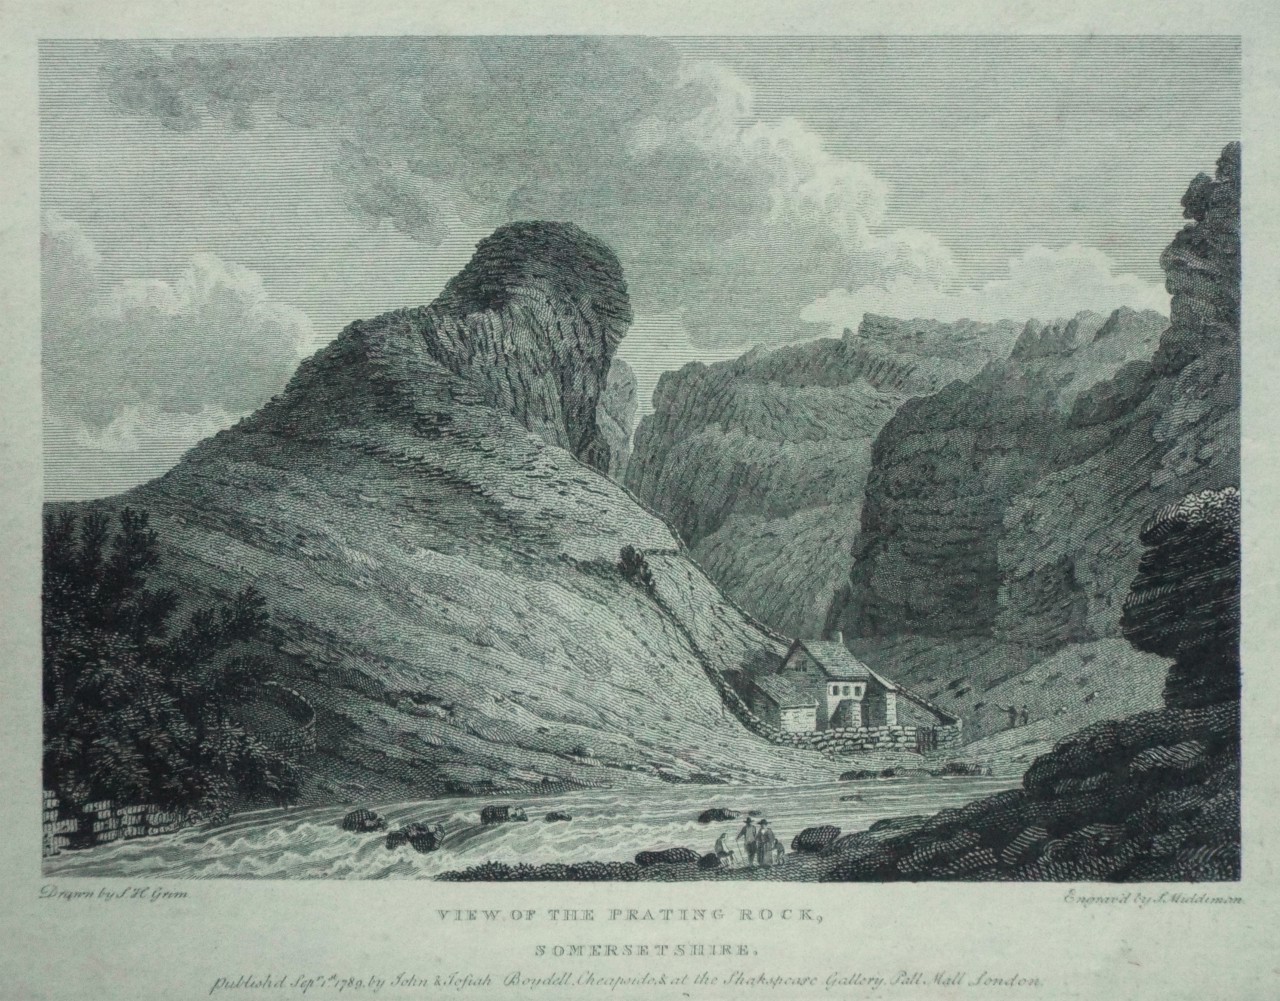 Print - View of the Prating Rock, Somersetshire.